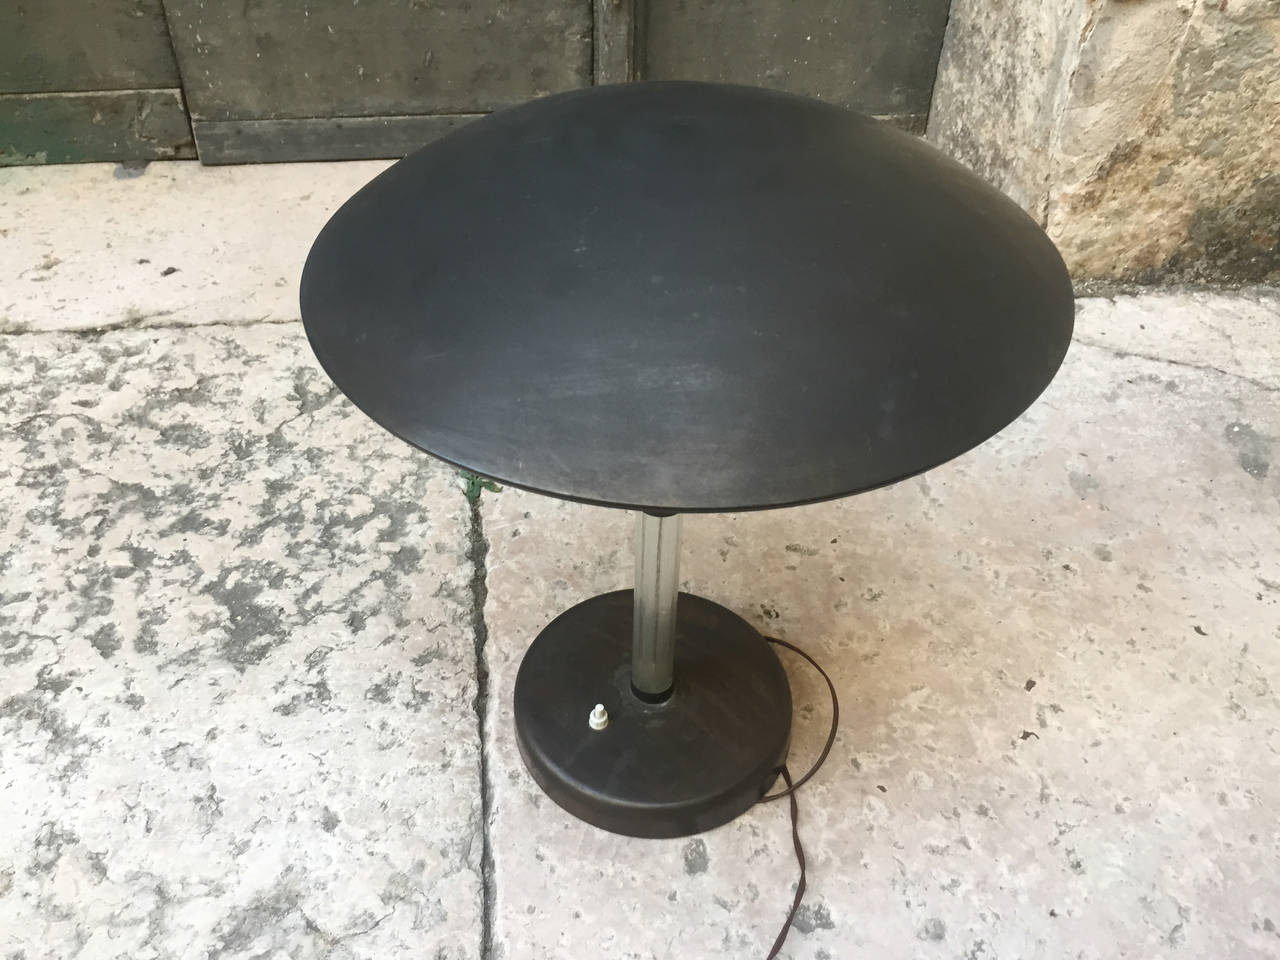 Beautiful table lamp, 1948.
Blown glass Pulegoso, no breaks in perfect condition. Brass frame and light diffuser in painted metal.
Base brass polish.